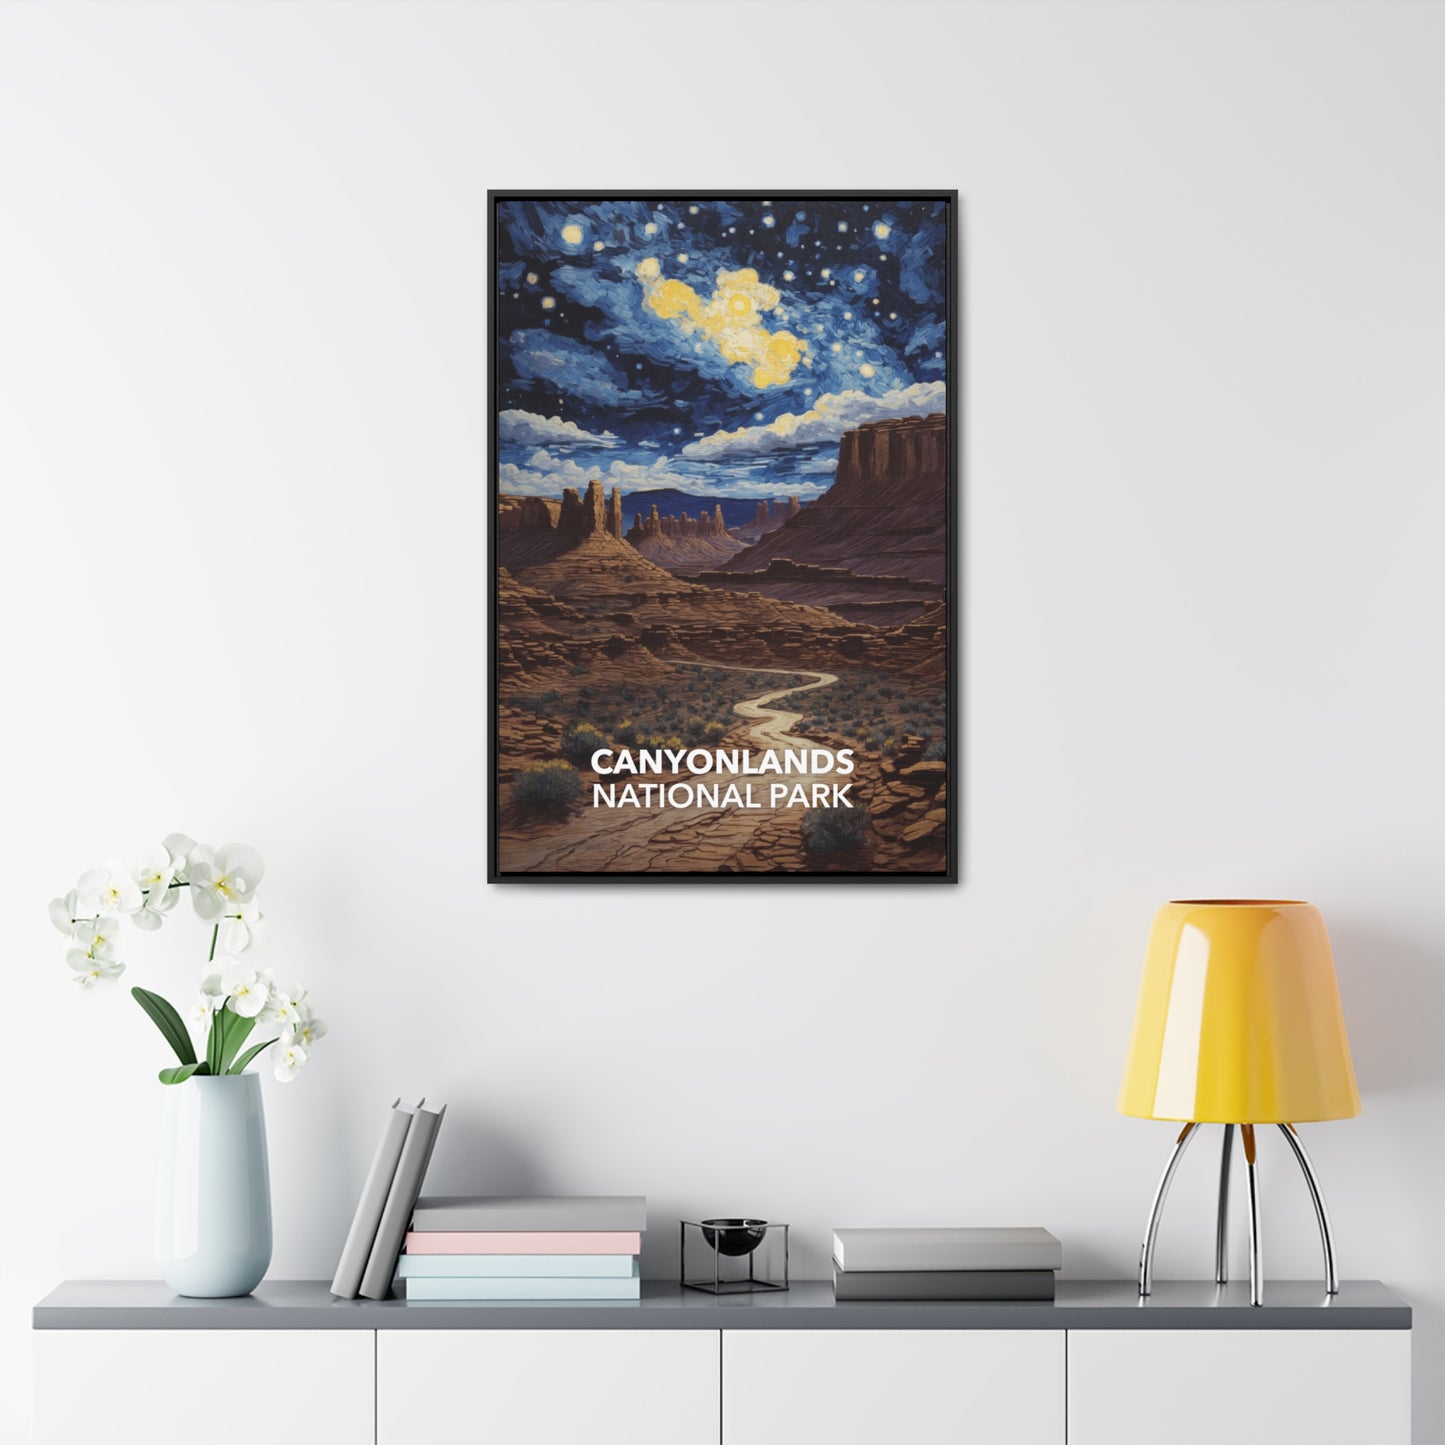 Canyonlands National Park Framed Canvas - The Starry Night